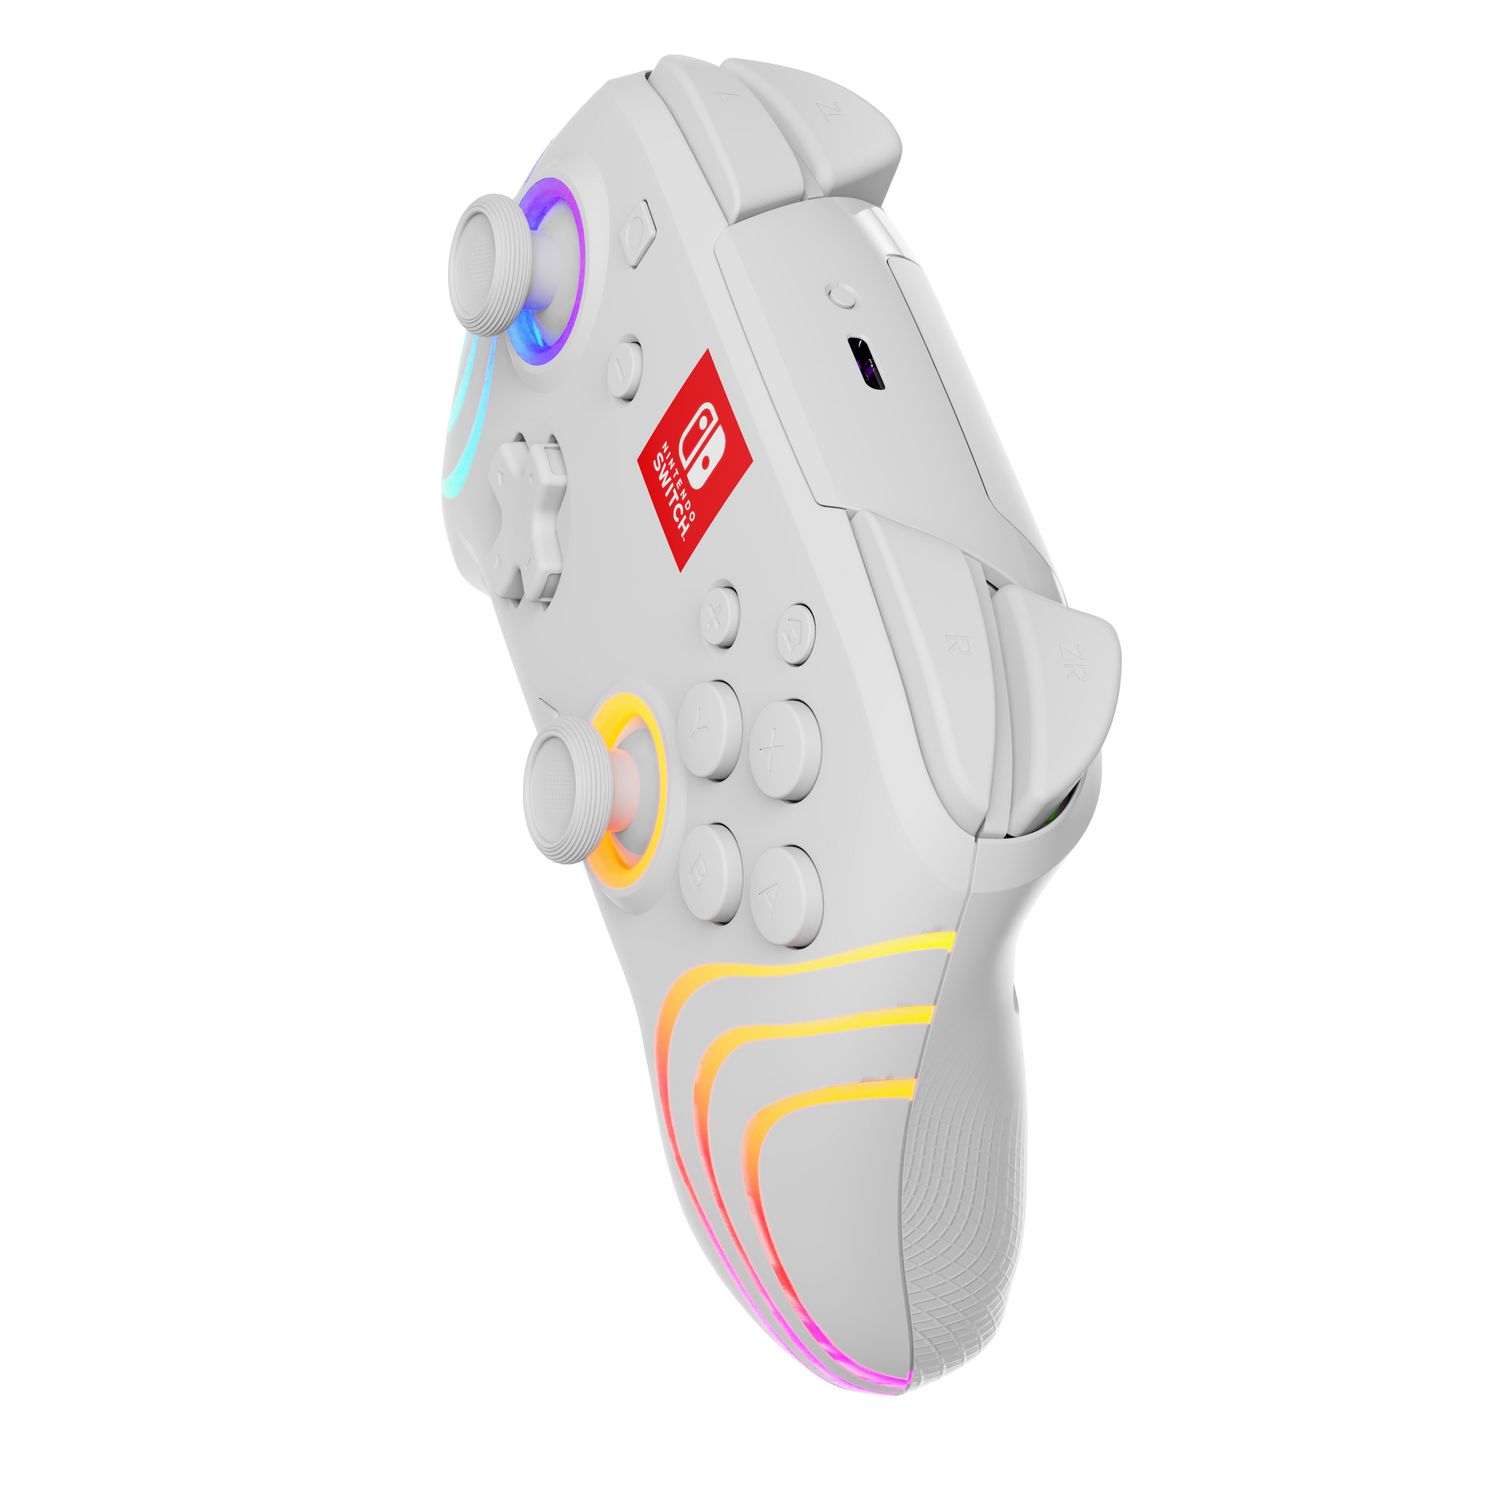 PDP Afterglow™ Wave Wireless Controller: White Nintendo Switch 